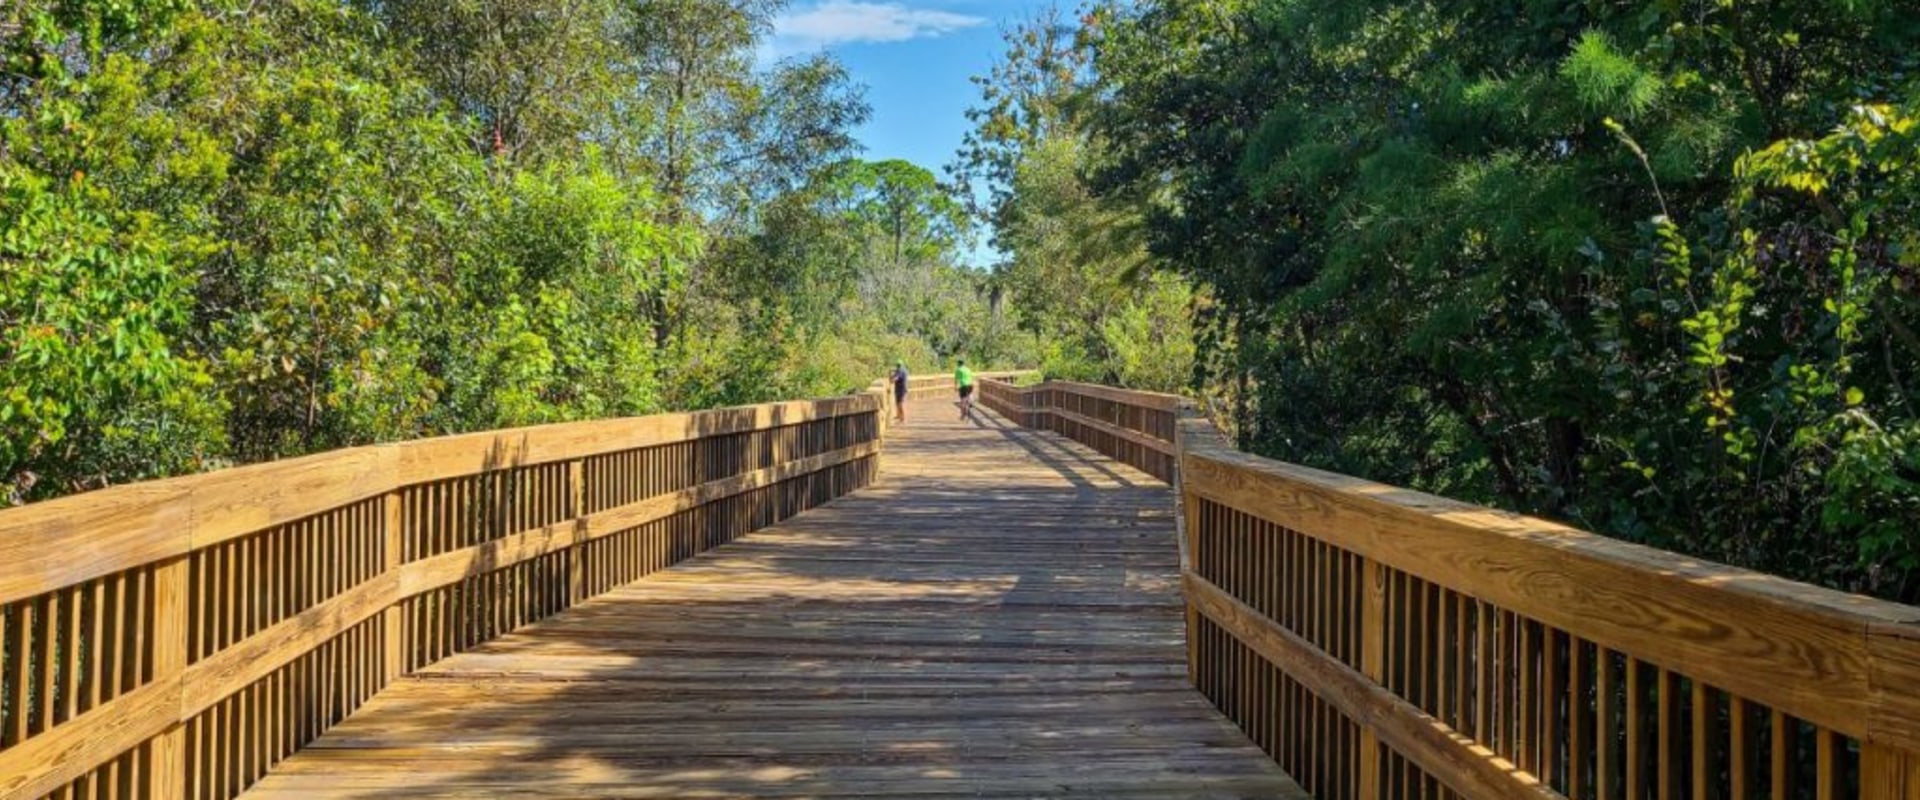 Exploring the Best Bike Trails with Wooden Bridges and Boardwalks in Palm Beach County, Florida